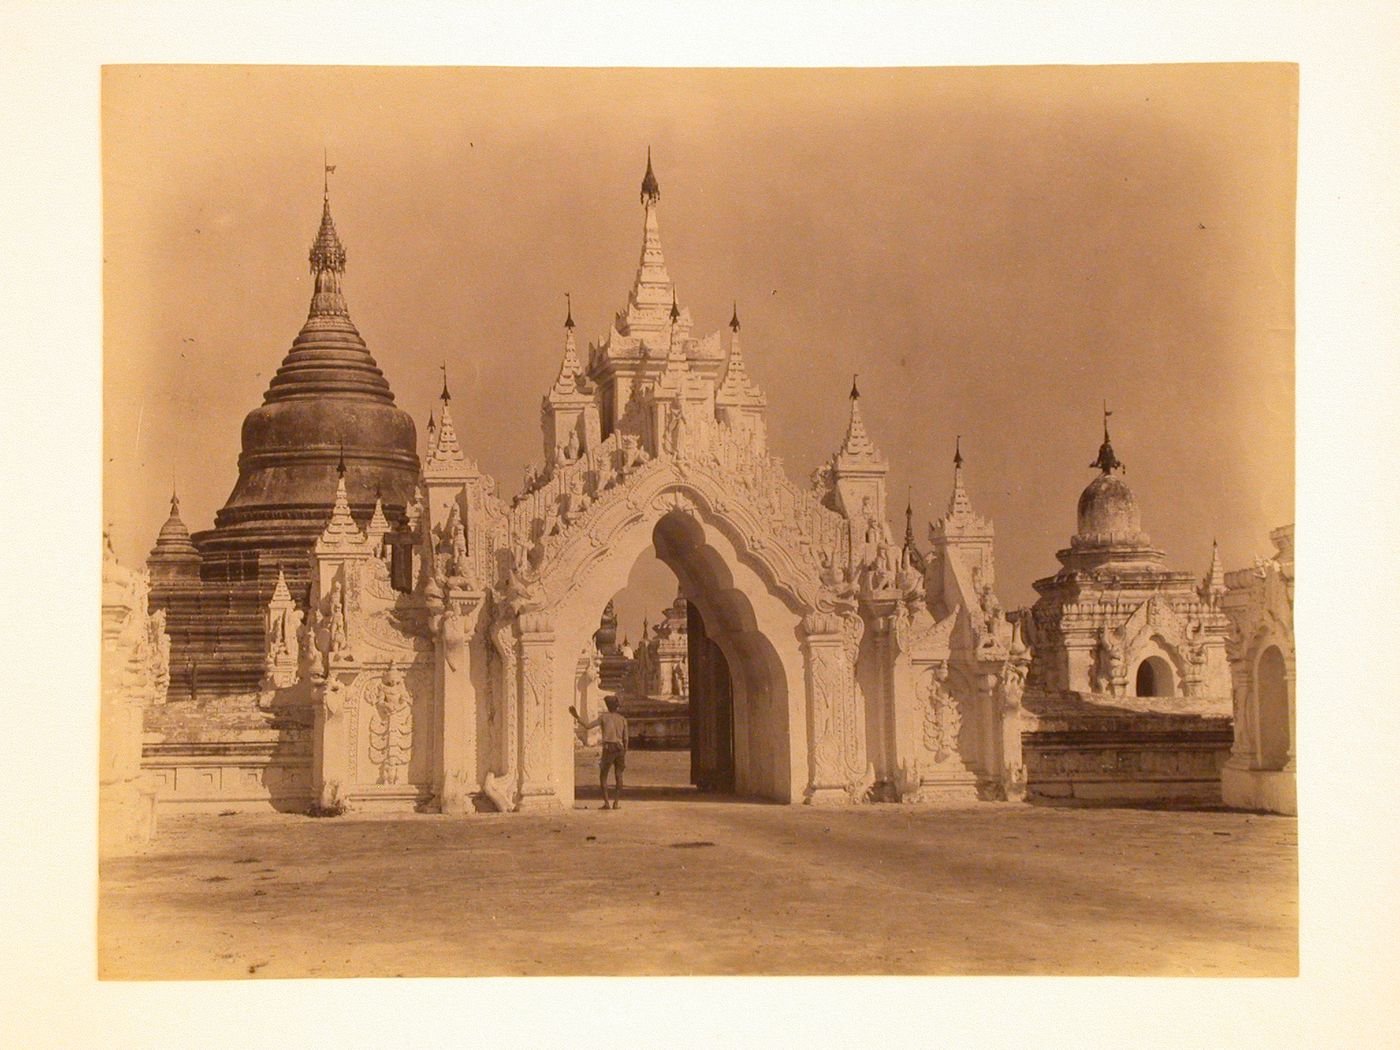 View of an arched entrance to a pagoda complex, Mandalay, Burma (now Myanmar)